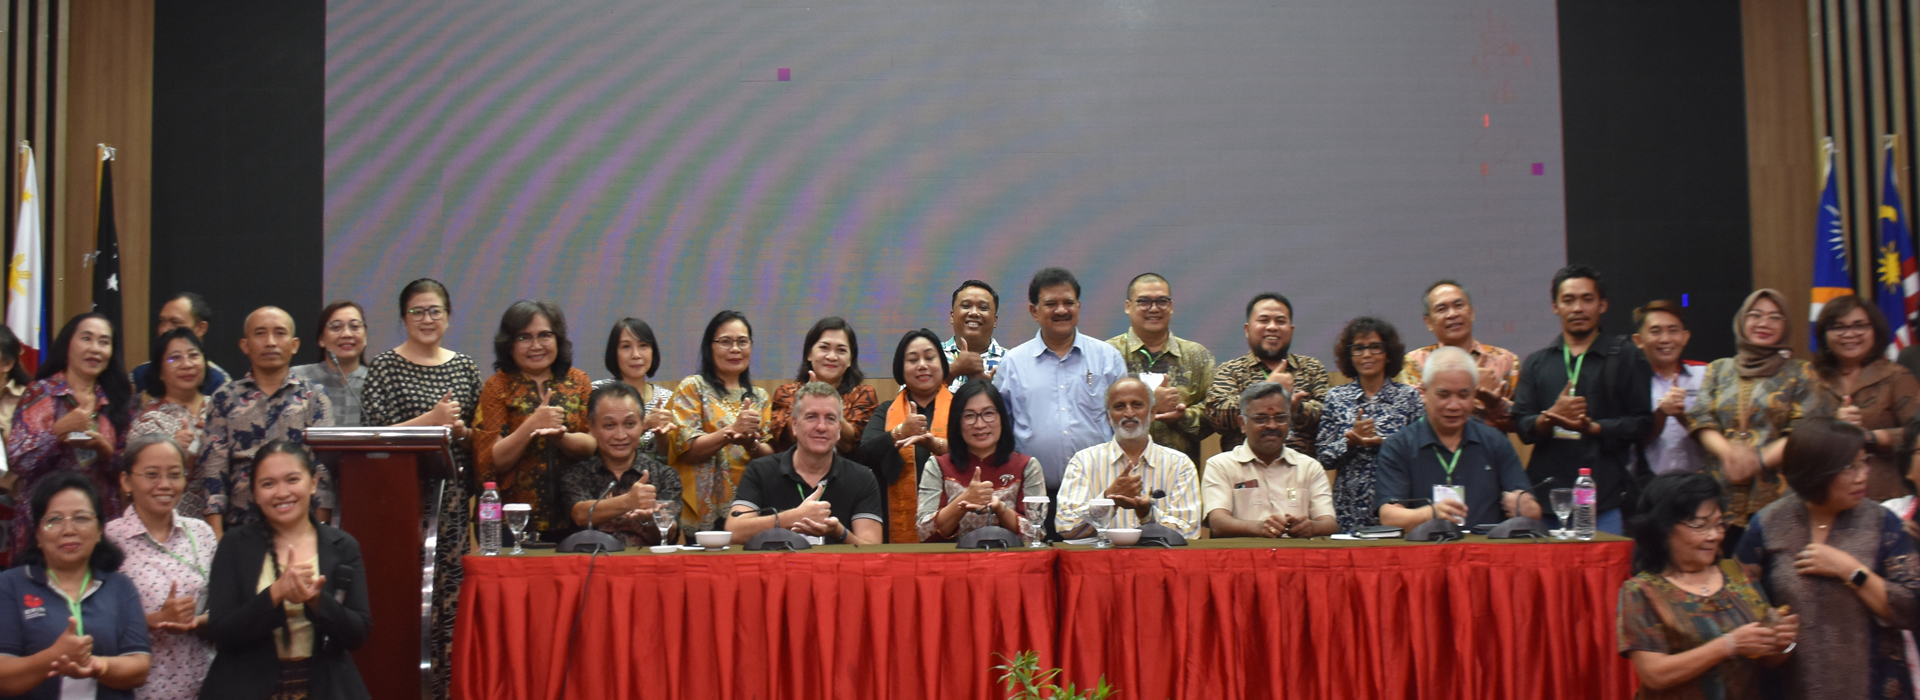 international-seminar-on-harnessing-coconut-potential-for-offsetting-carbon-emissions-integrating-science-and-economy-for-a-sustainable-future20231018161424.jpg